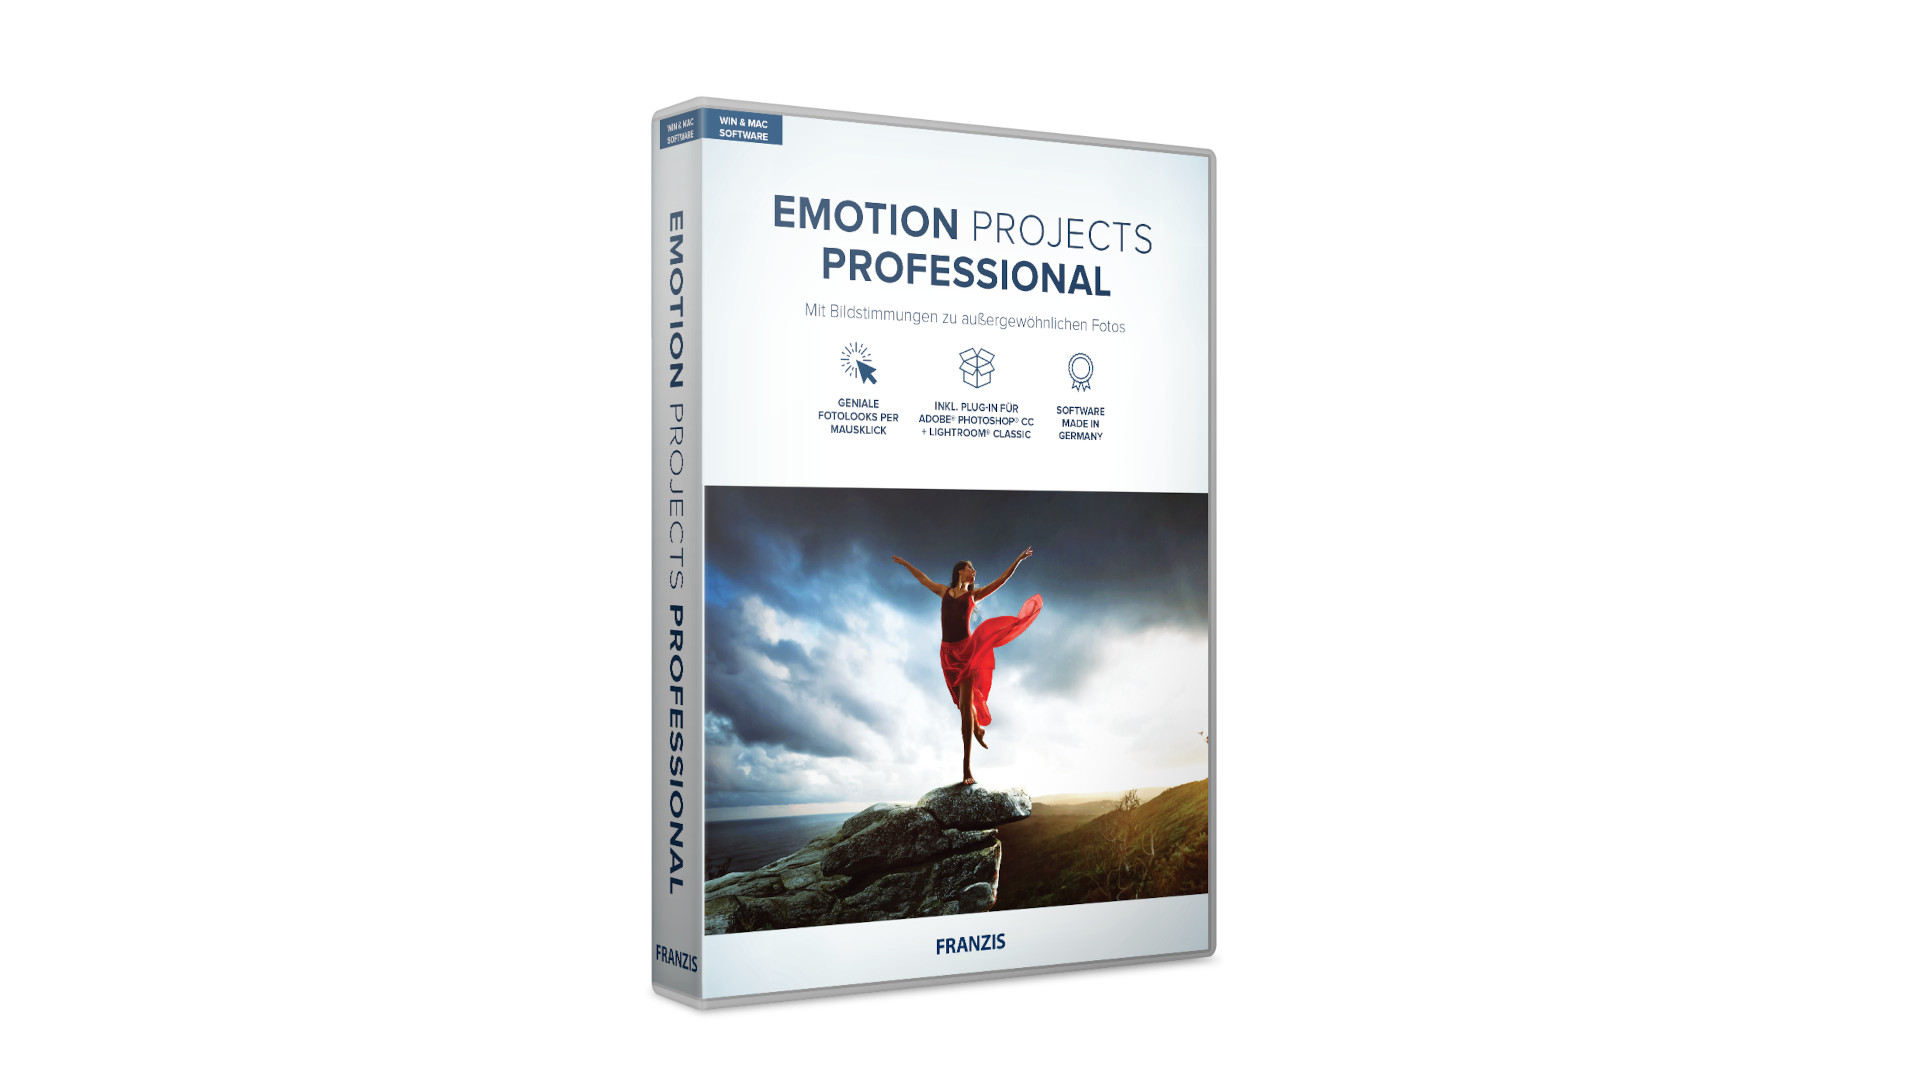 (33.89$) EMOTION Projects Professional - Project Software Key (Lifetime / 1 PC)